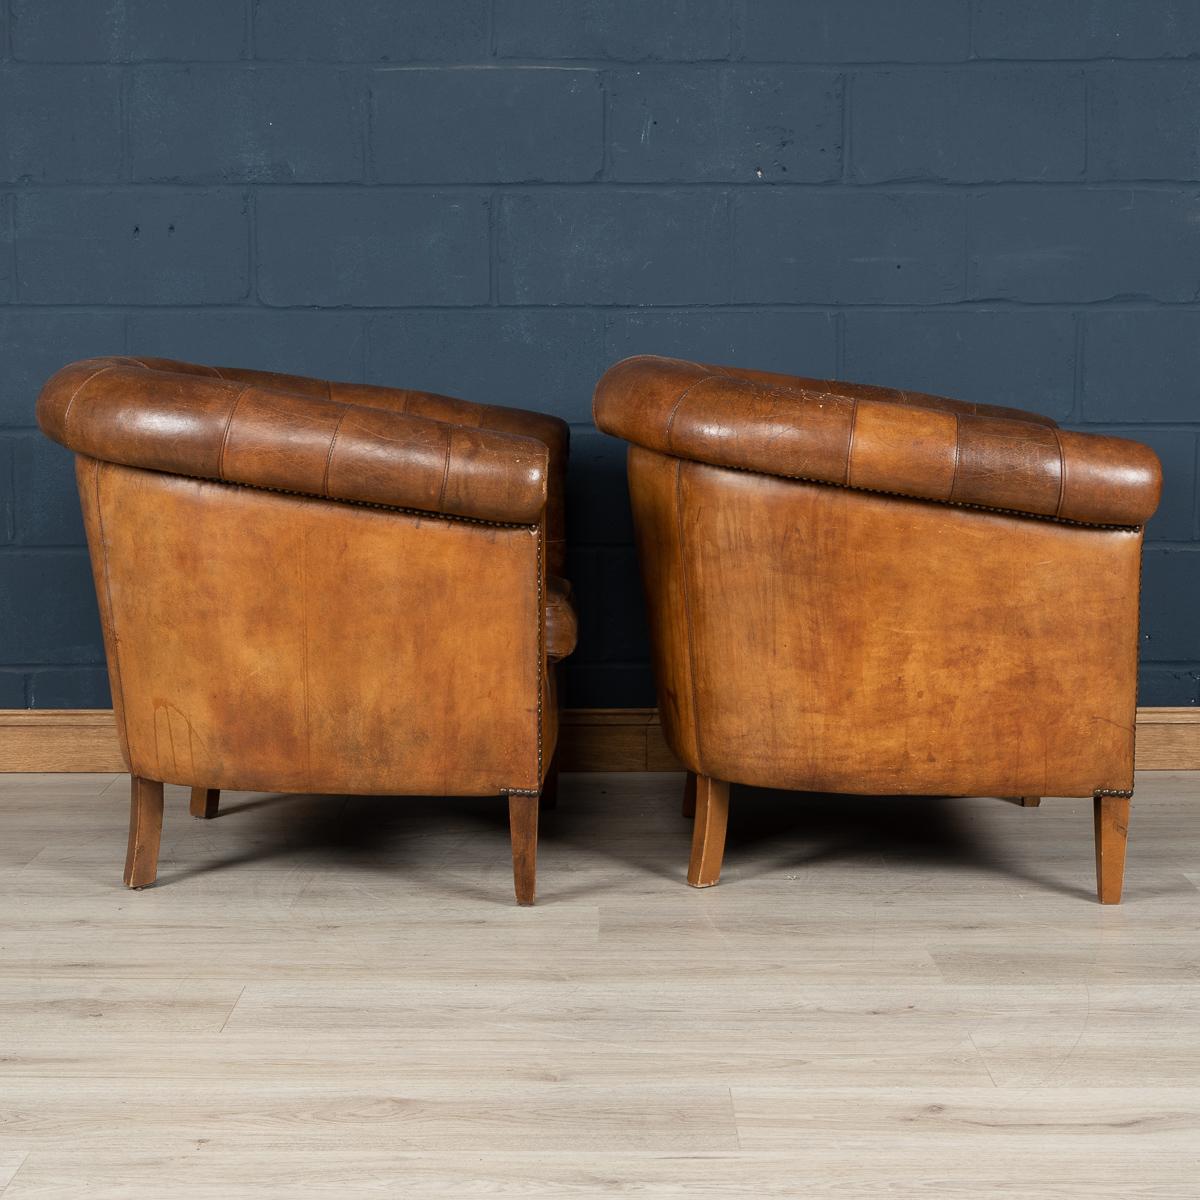 Late 20th Century Pair of Dutch Sheepskin Leather Club Chairs 1